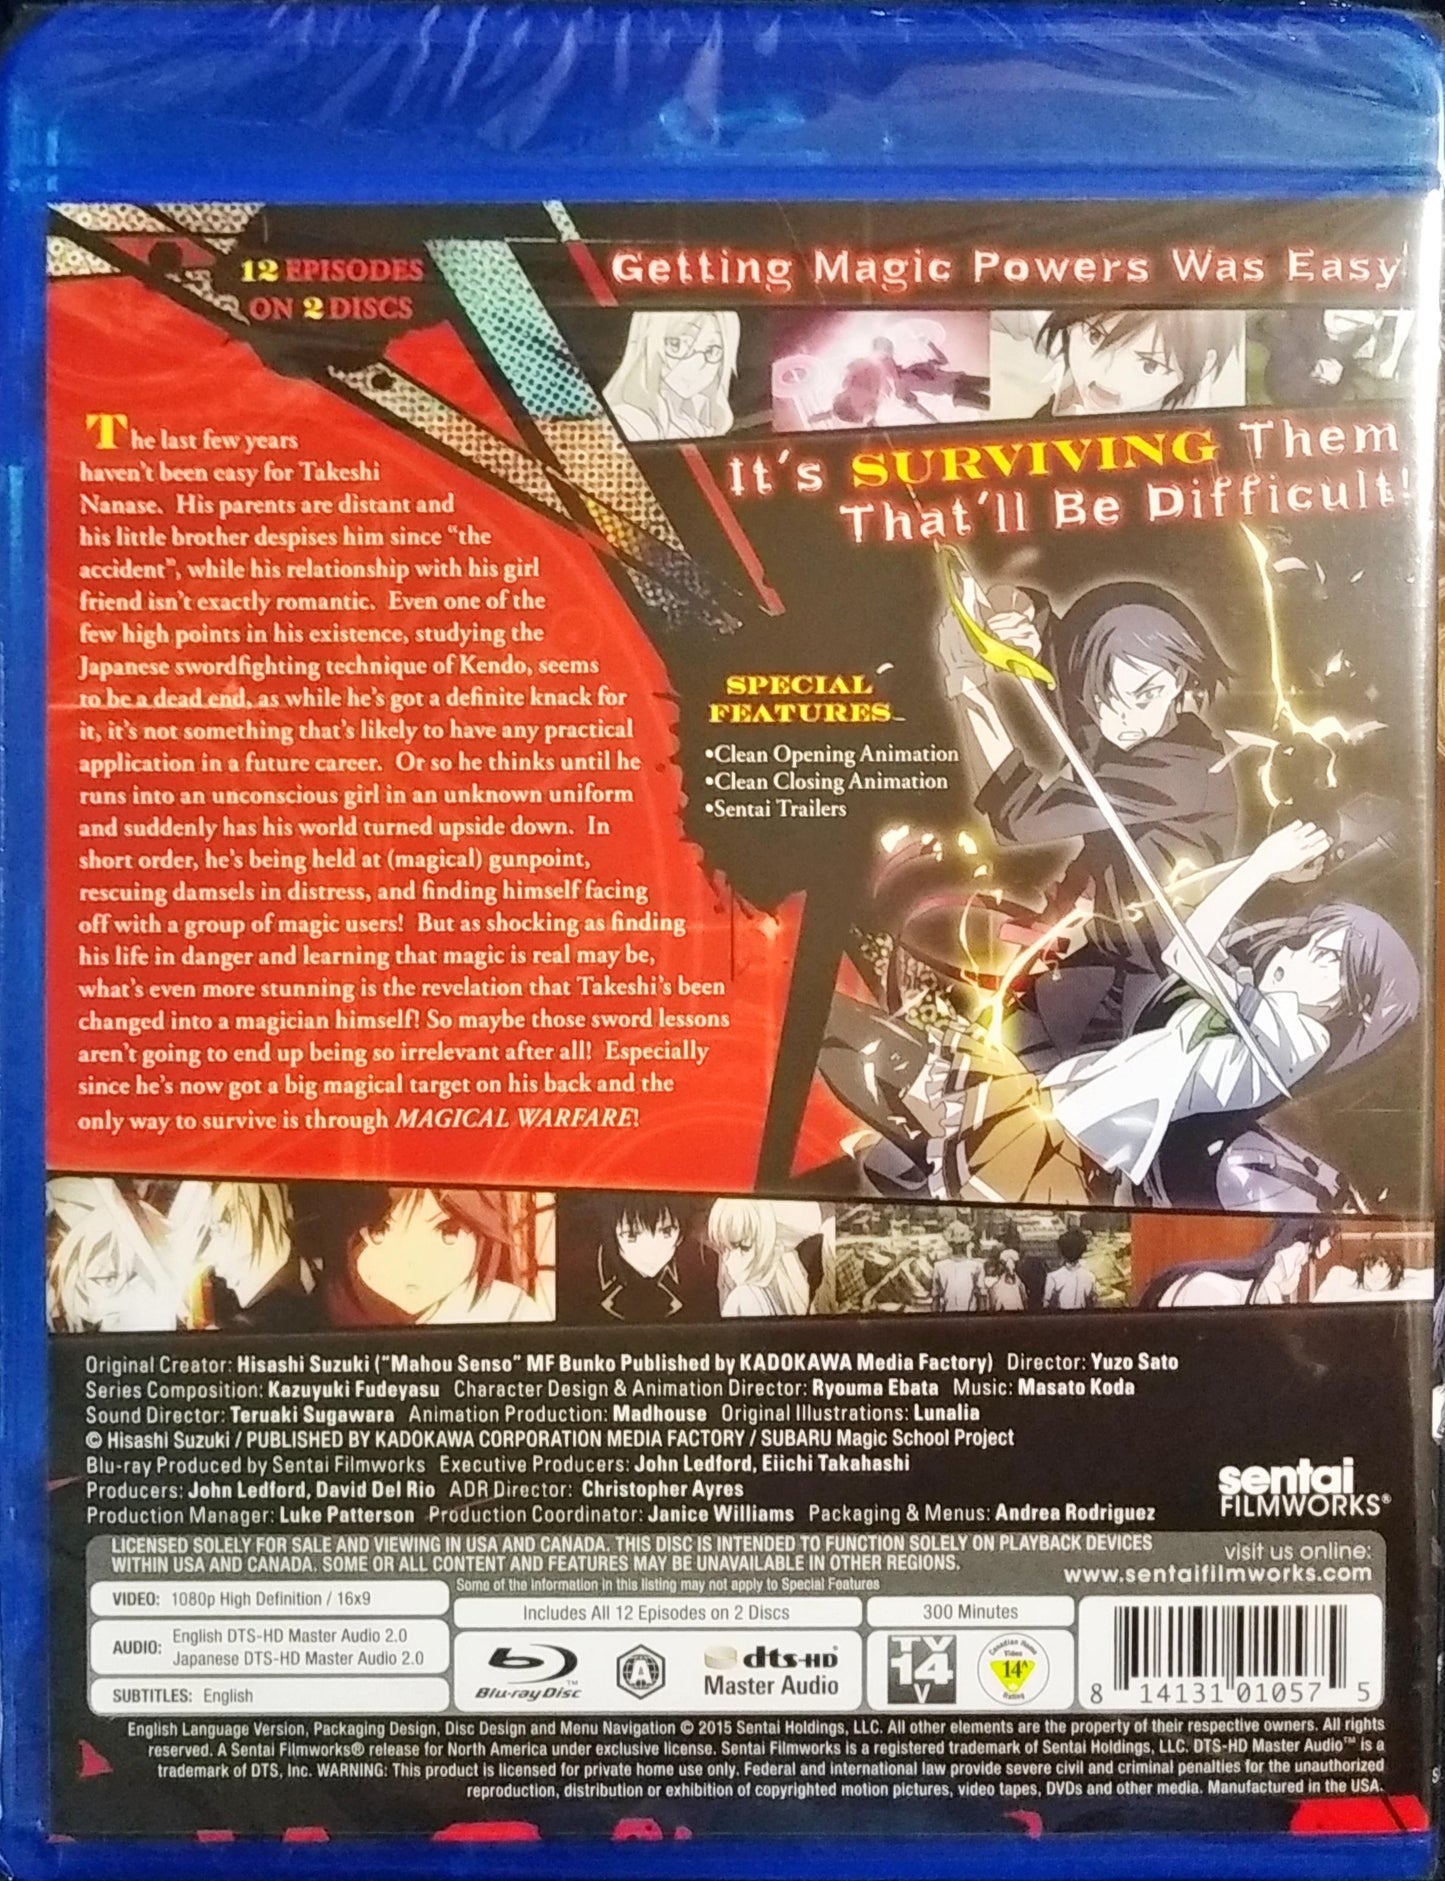 Magical Warfare Blu-ray Complete Collection Sealed